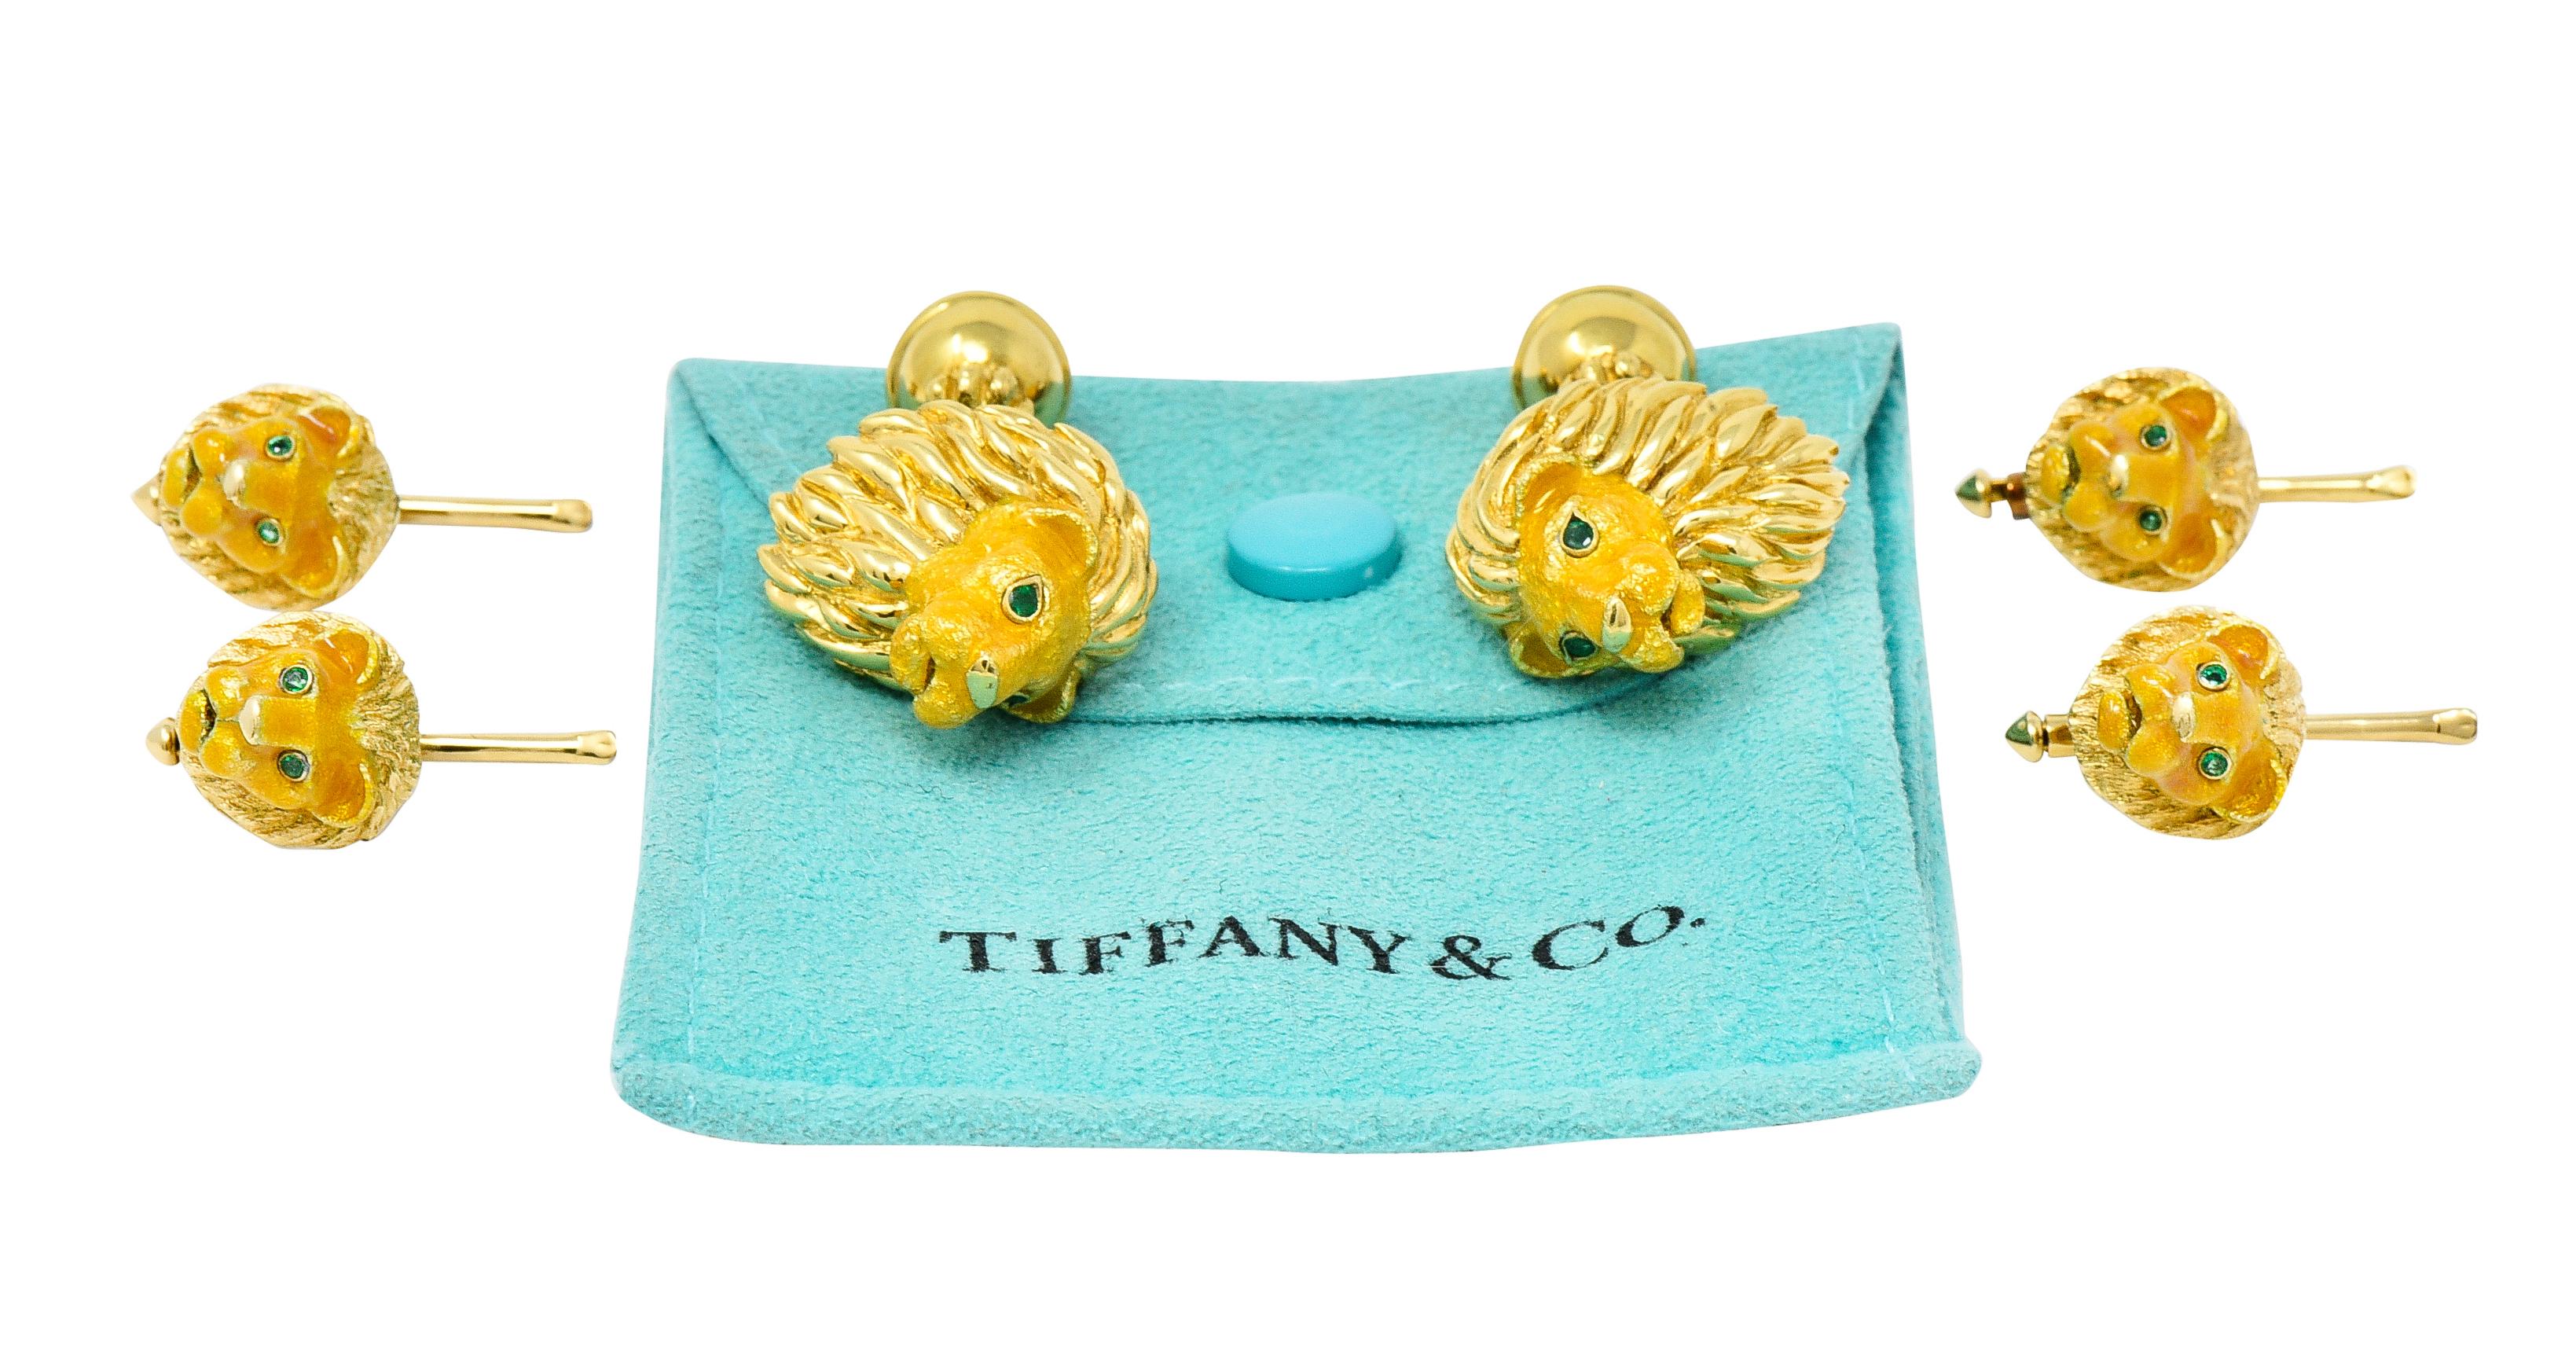 Matching set includes one full set of bar cufflinks and four studs terminating with stylized lion heads. Featuring deeply grooved high polish mane and textured fur covered in enamel.. Transparent and glossy orangey yellow in color - exhibiting